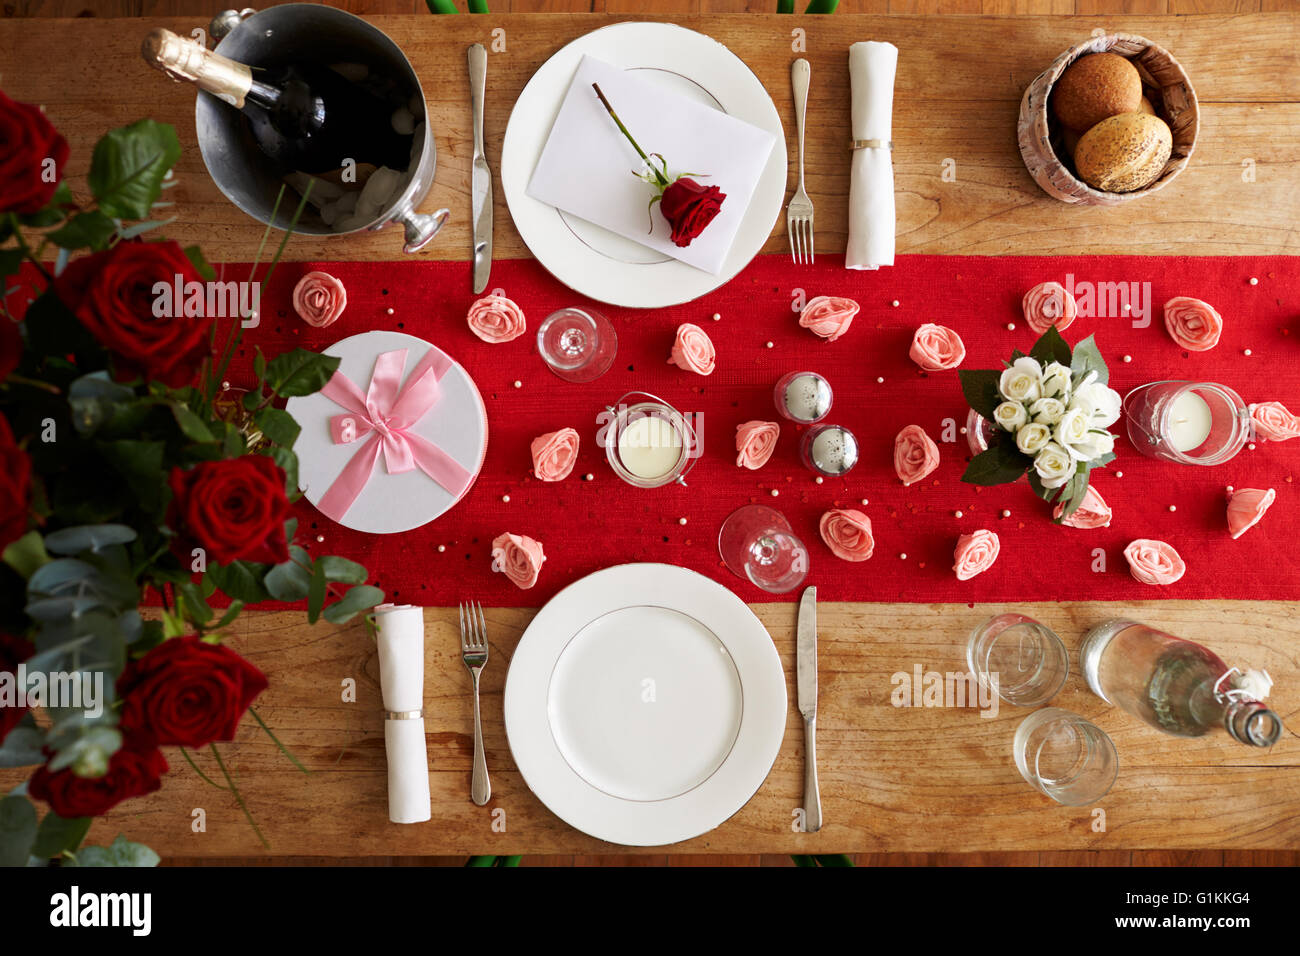 Overhead View Of Table Set For Romantic Valentines Day Meal Stock Photo